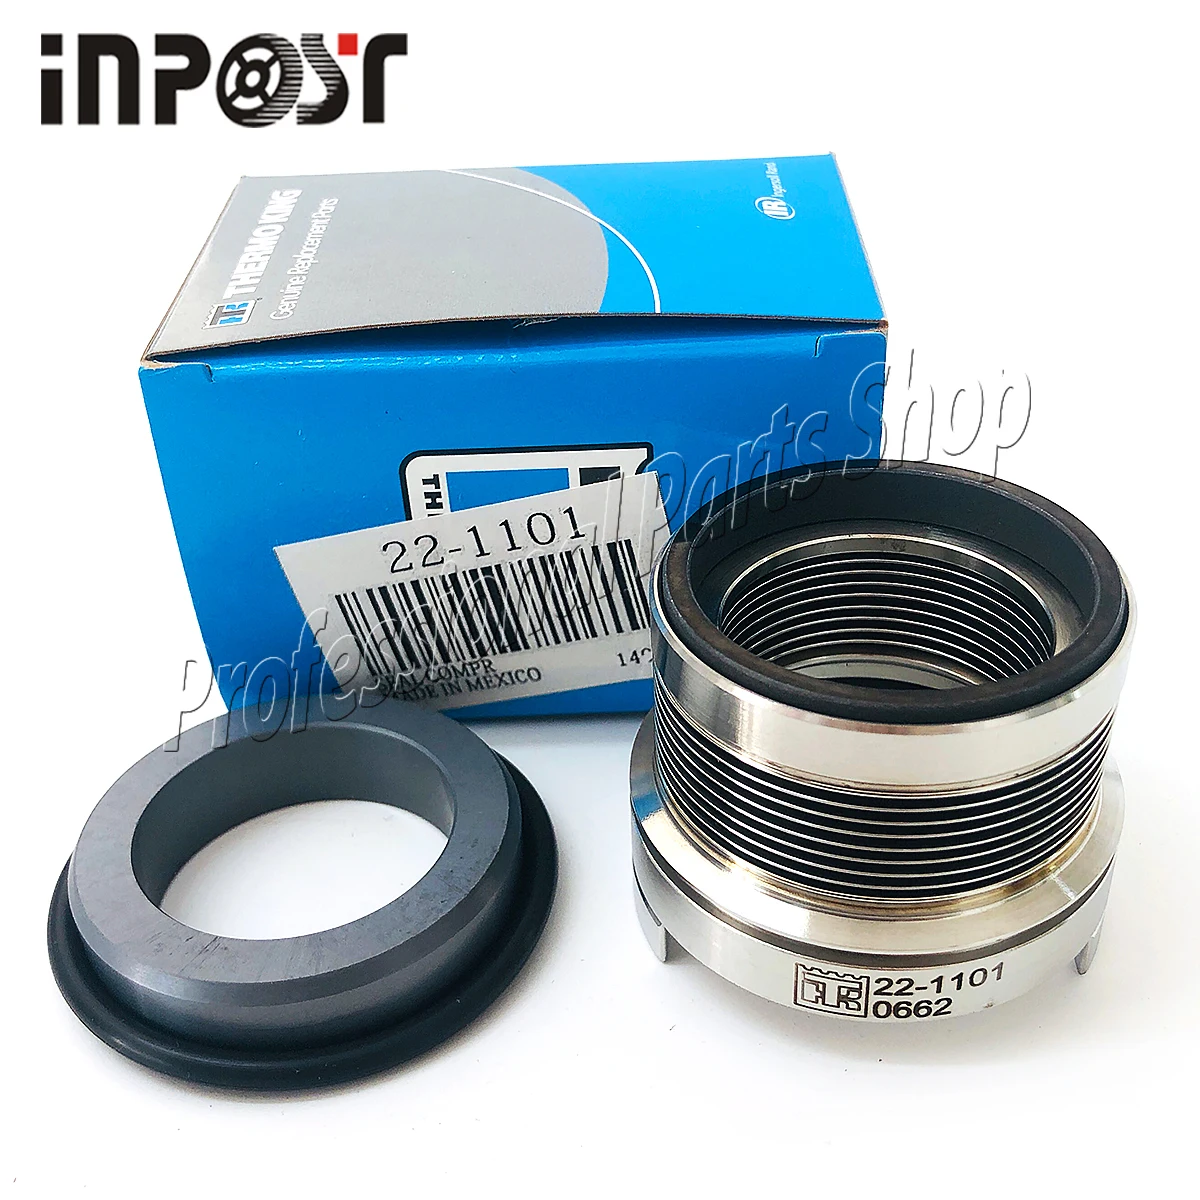 

22-1101 New Shaft Seal For Thermo King Compressor X426 X430 X426 LS X430 LSC5 221101